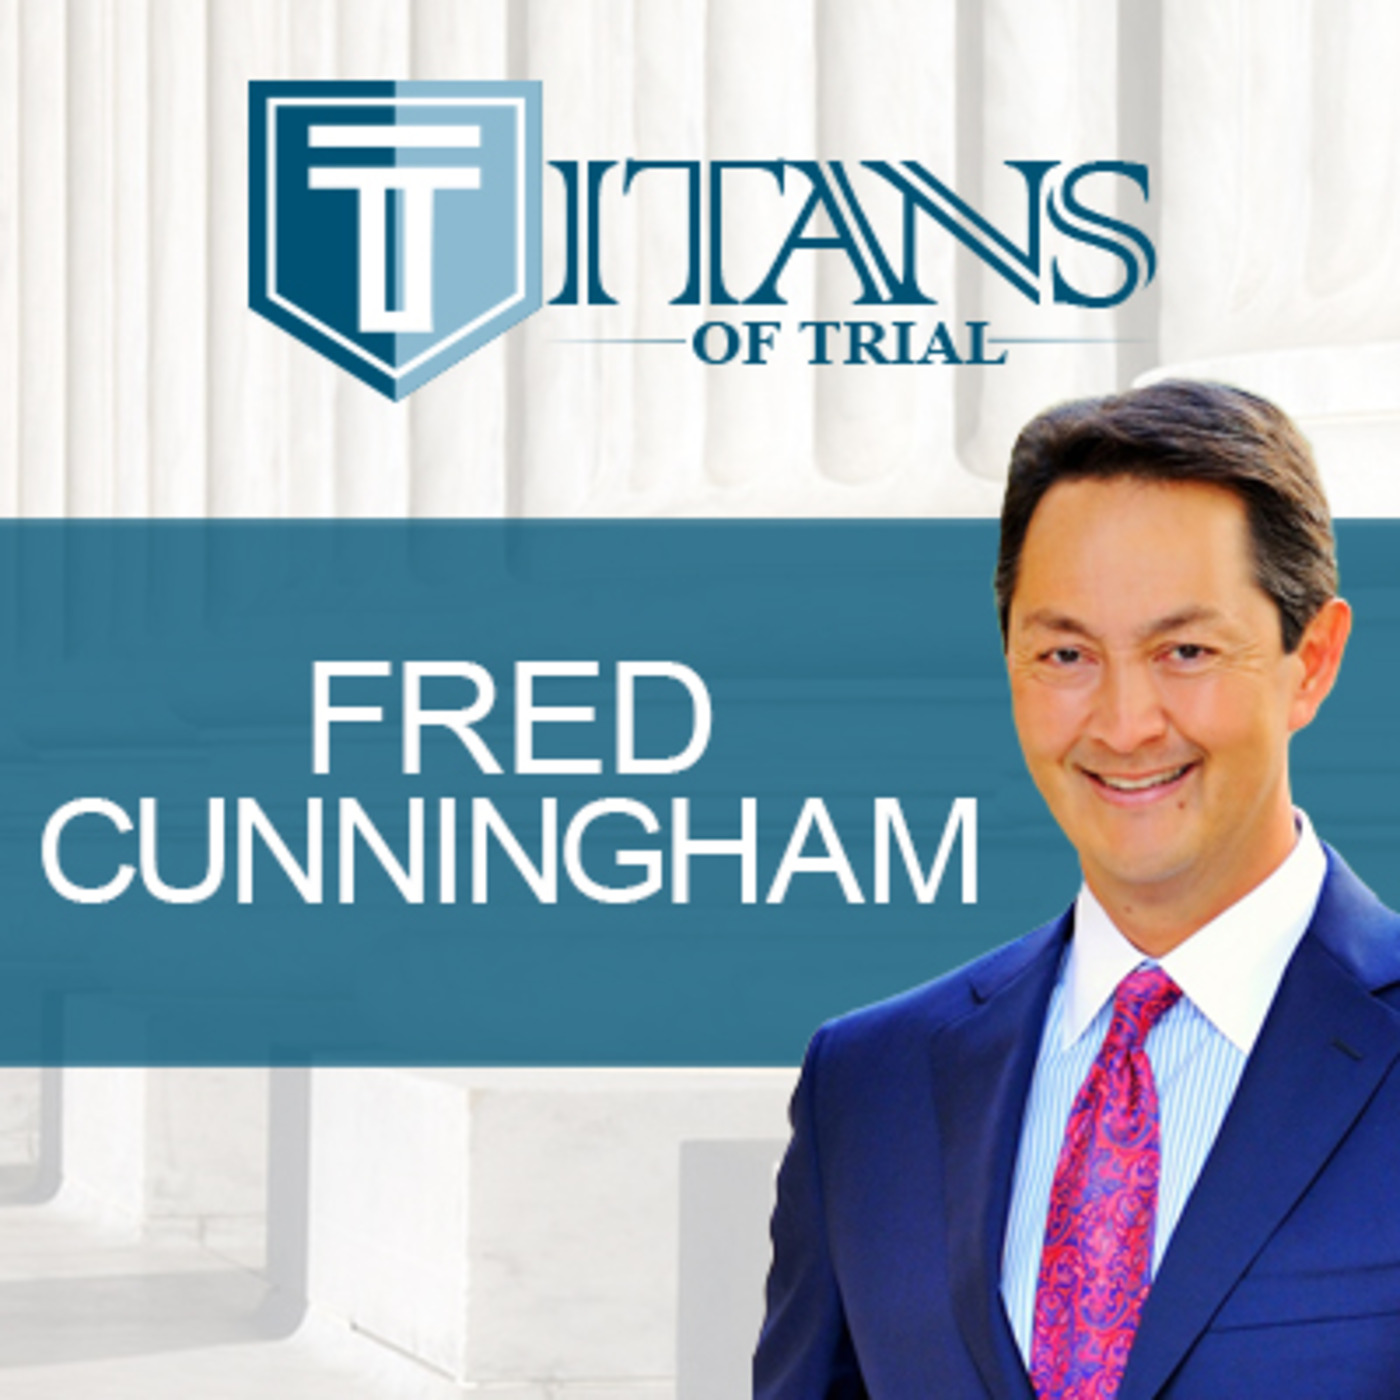 Titans of Trial – Fred Cunningham